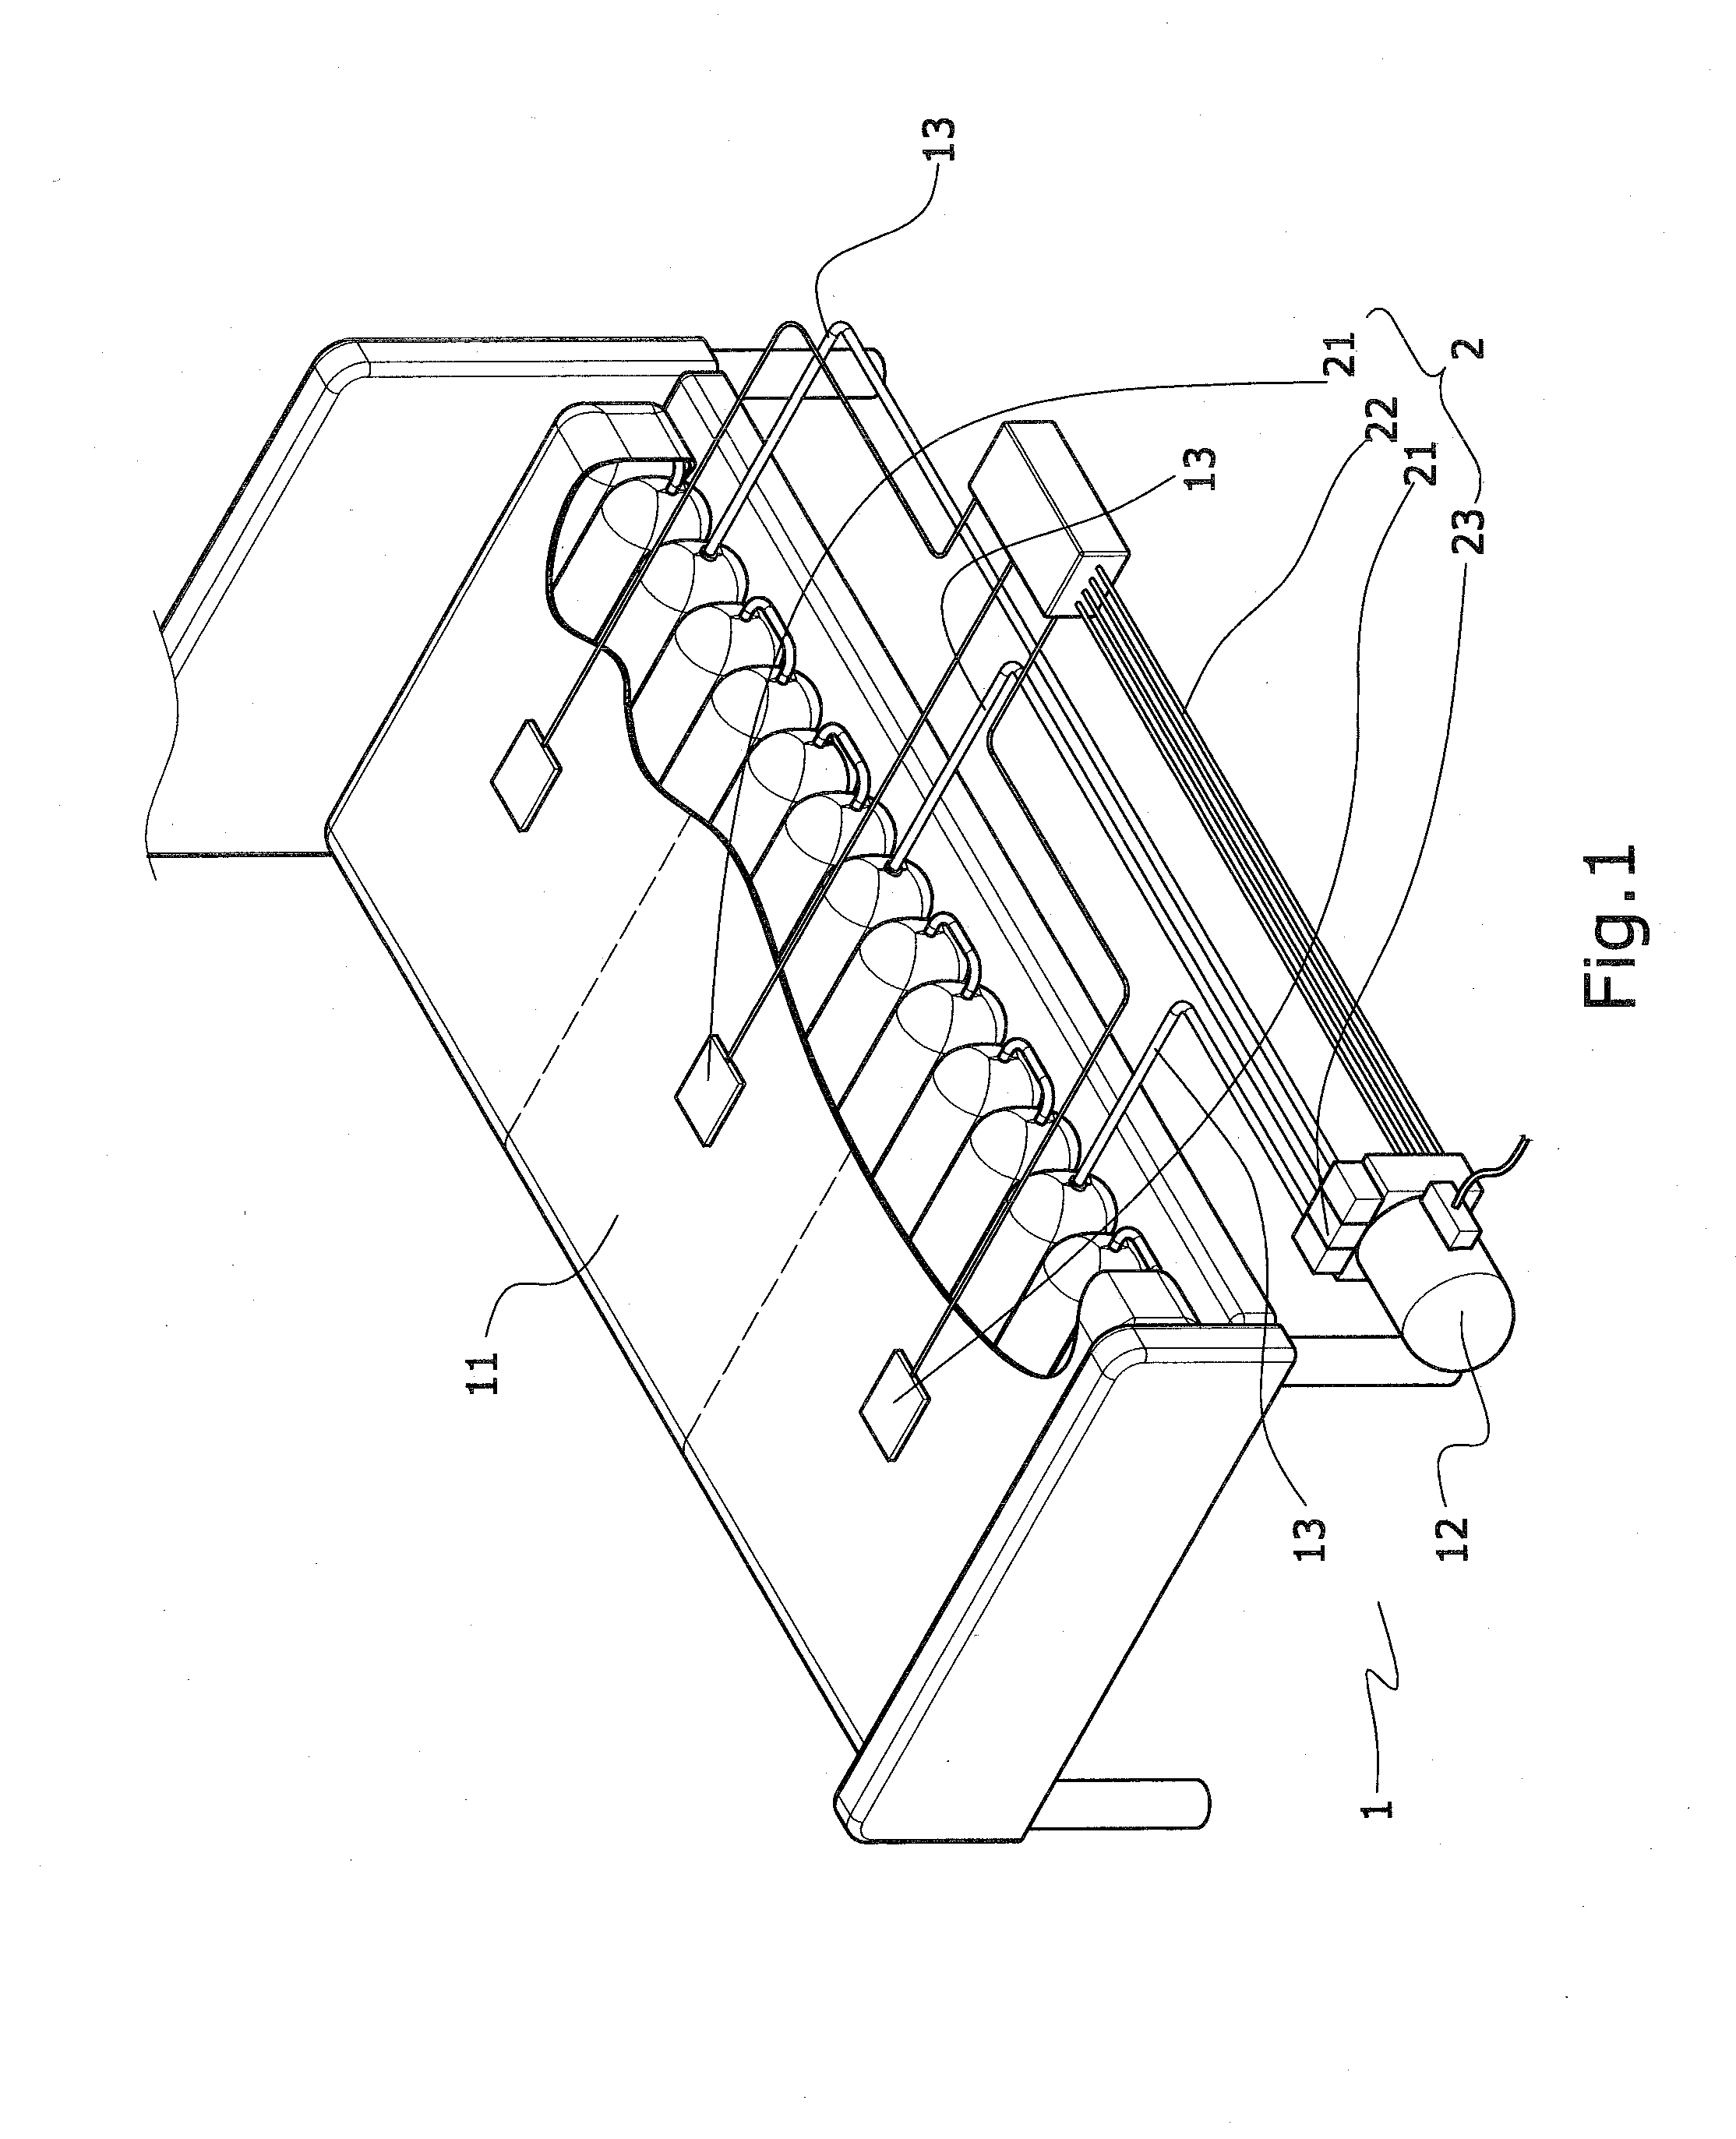 Structure of automatic pressure adjustable air bed